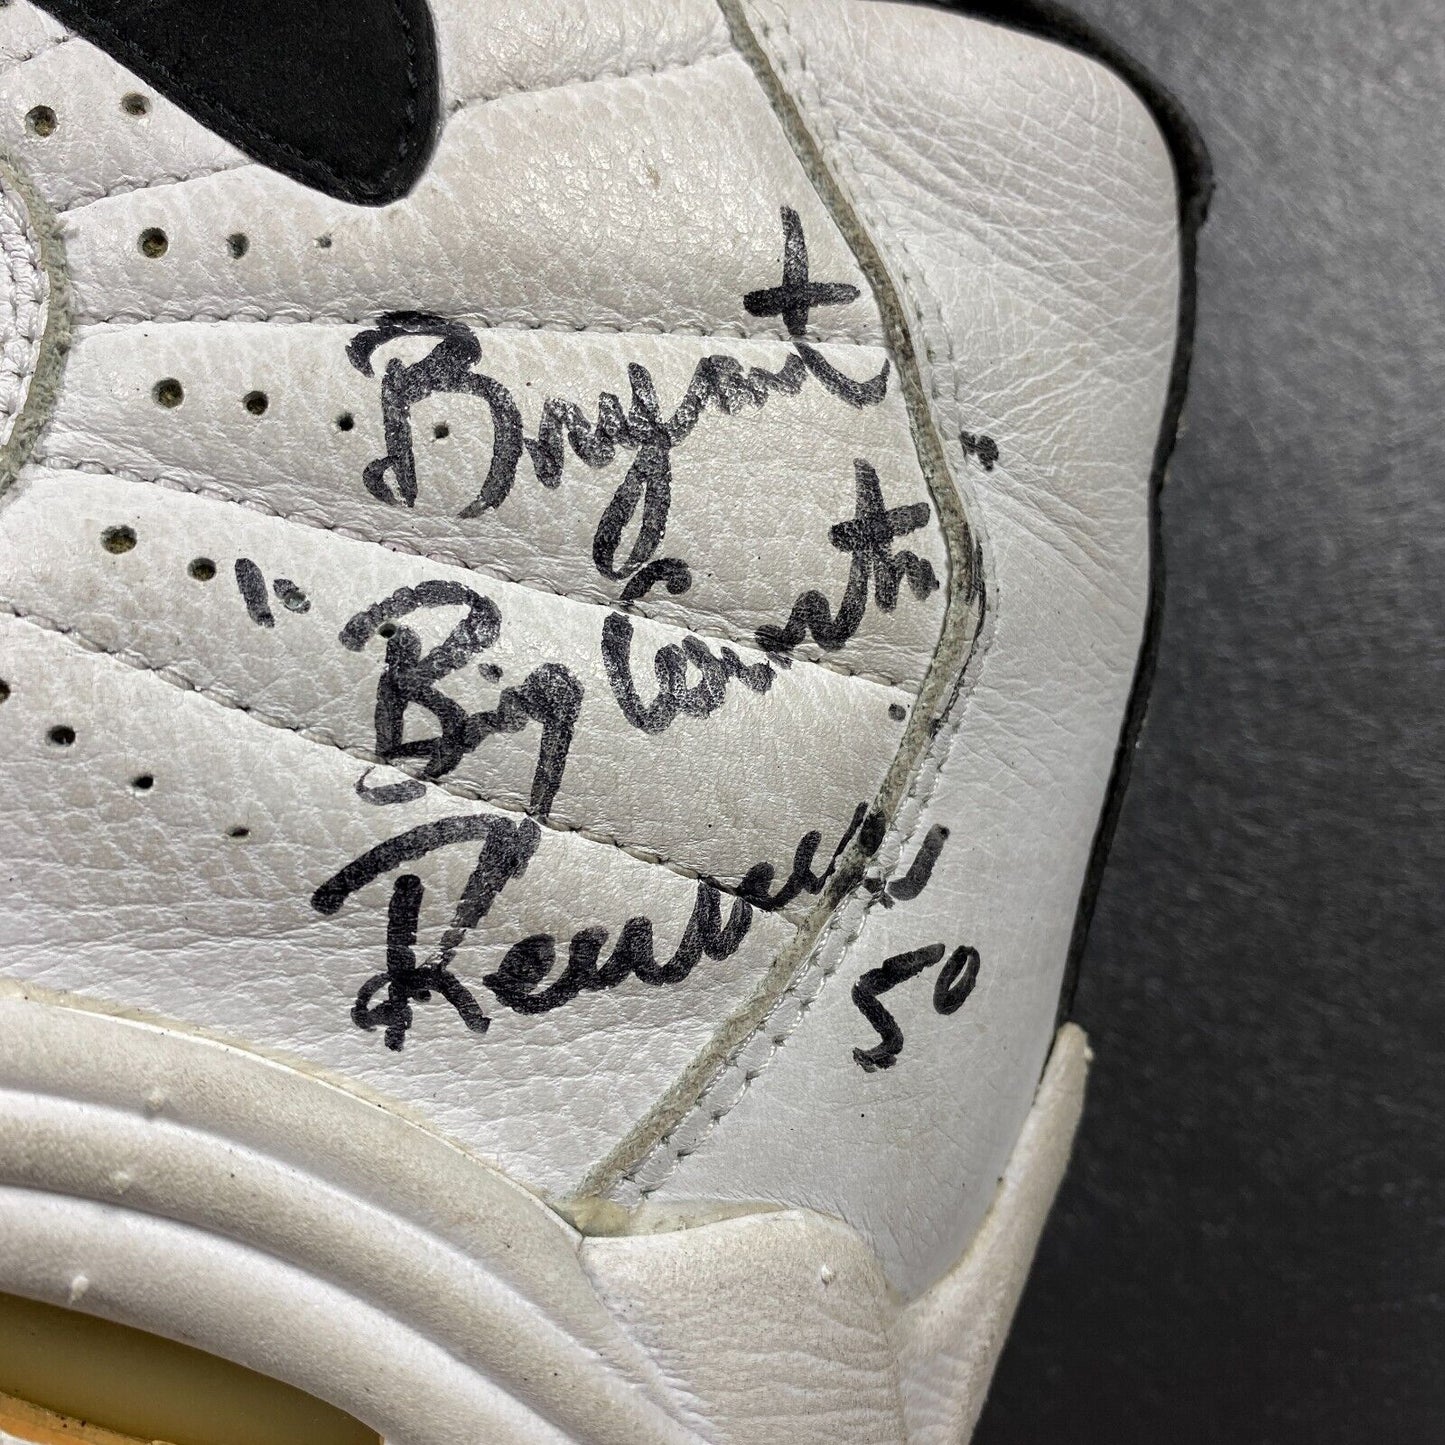 100% Authentic Bryant Reeves Signed Game Worn Nike Air Scorin Uptempo Sneaker